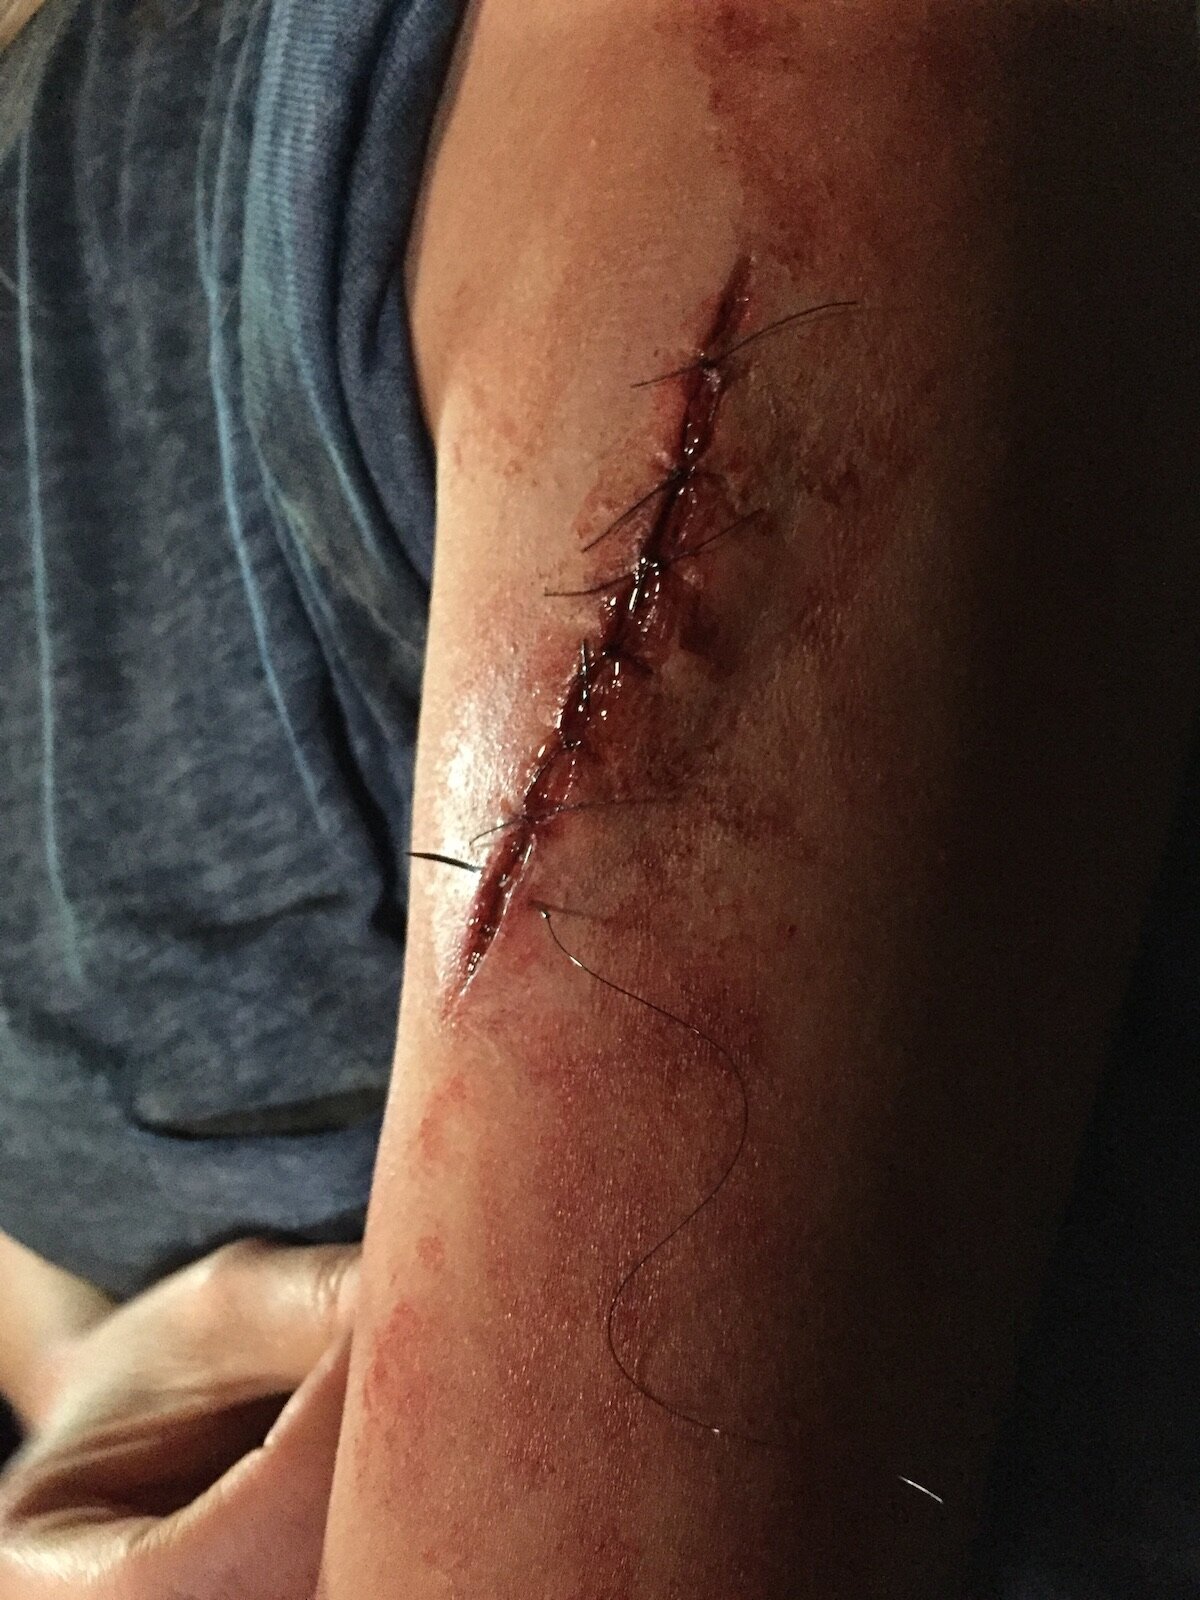 arm-with-fake-stitches-makeup-fx